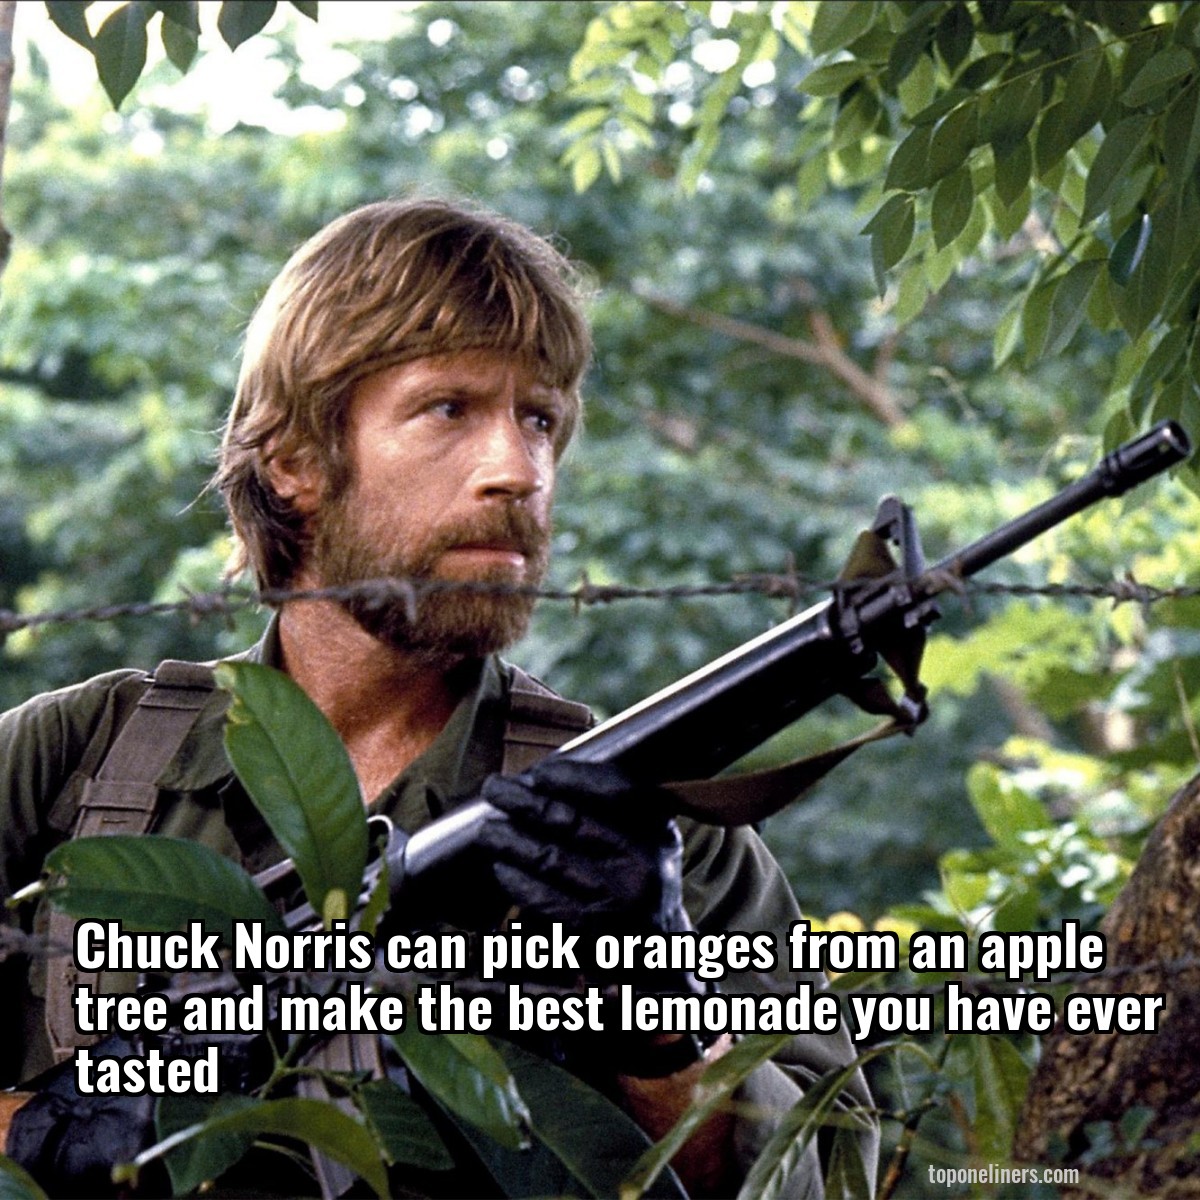 Chuck Norris can pick oranges from an apple tree and make the best lemonade you have ever tasted